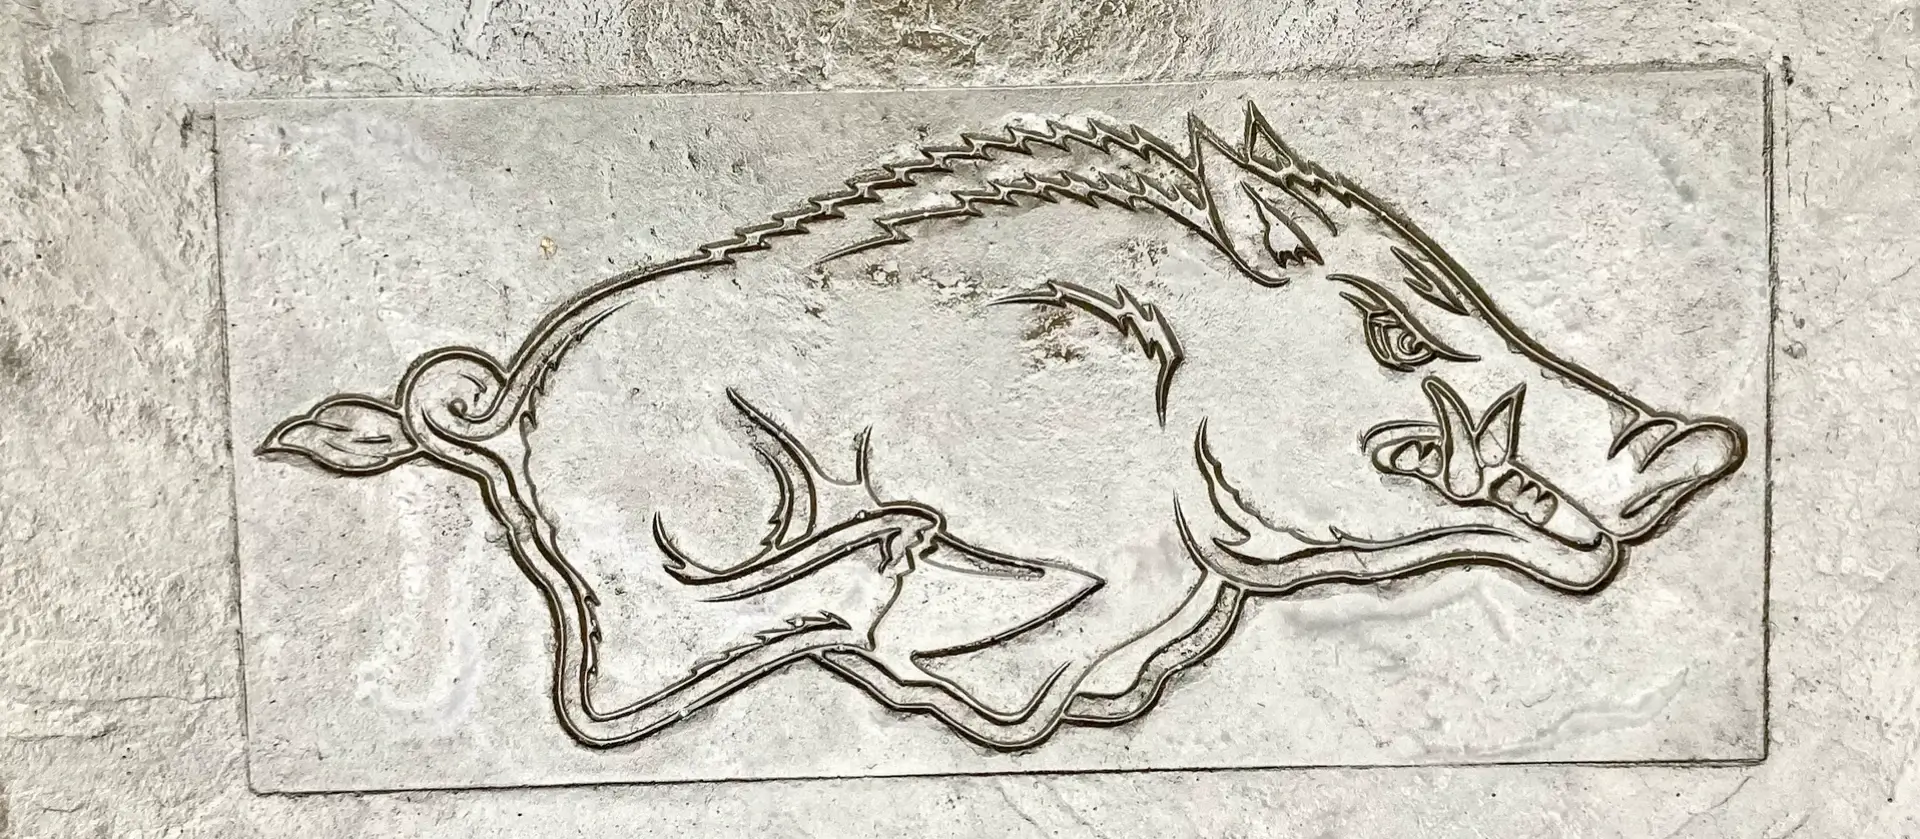 A picture of an animal carved into the ground.